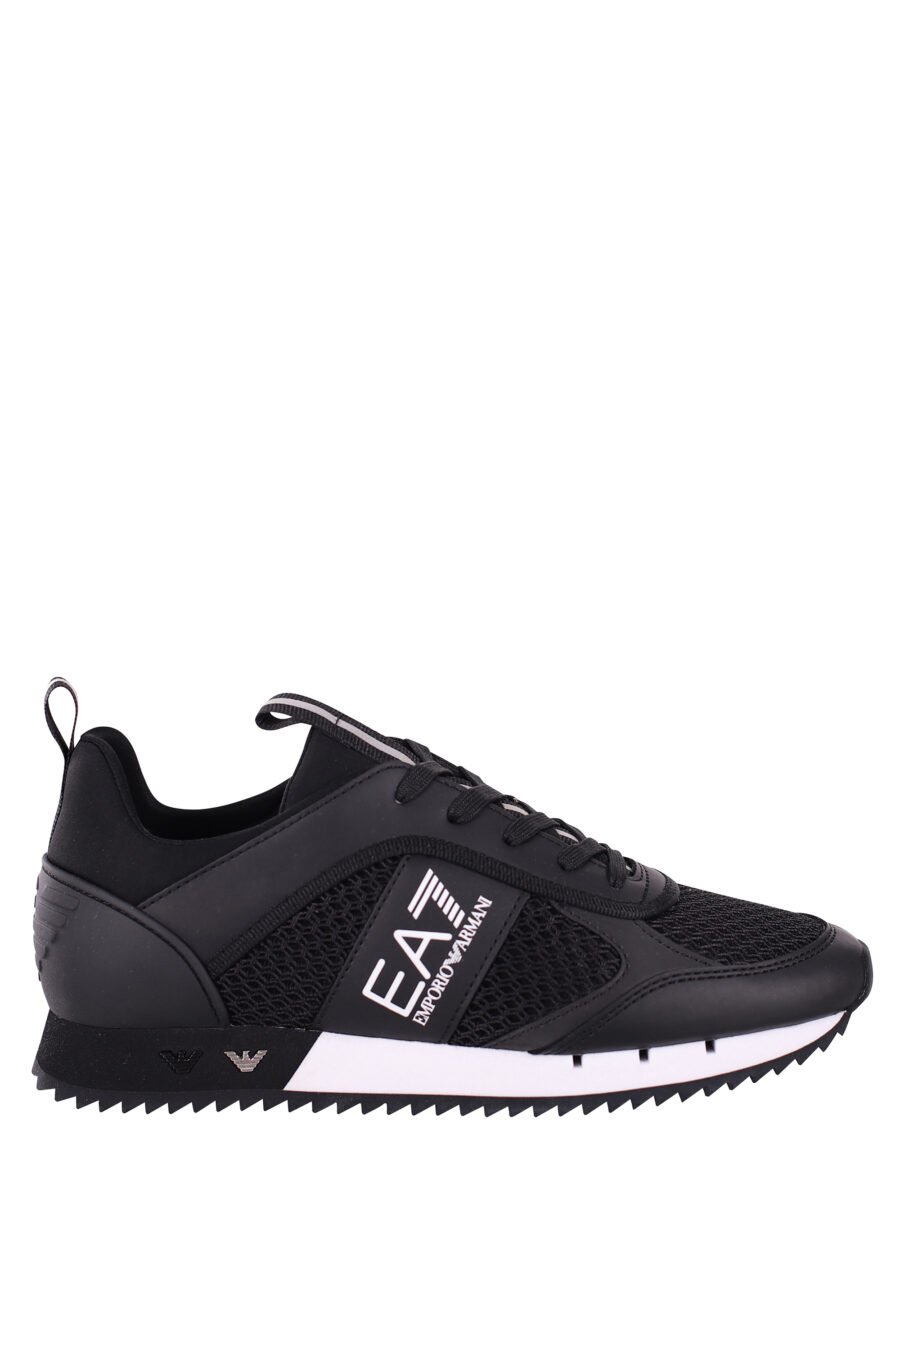 Breathable black trainers with white "lux identity" logo and two-tone sole - IMG 5768